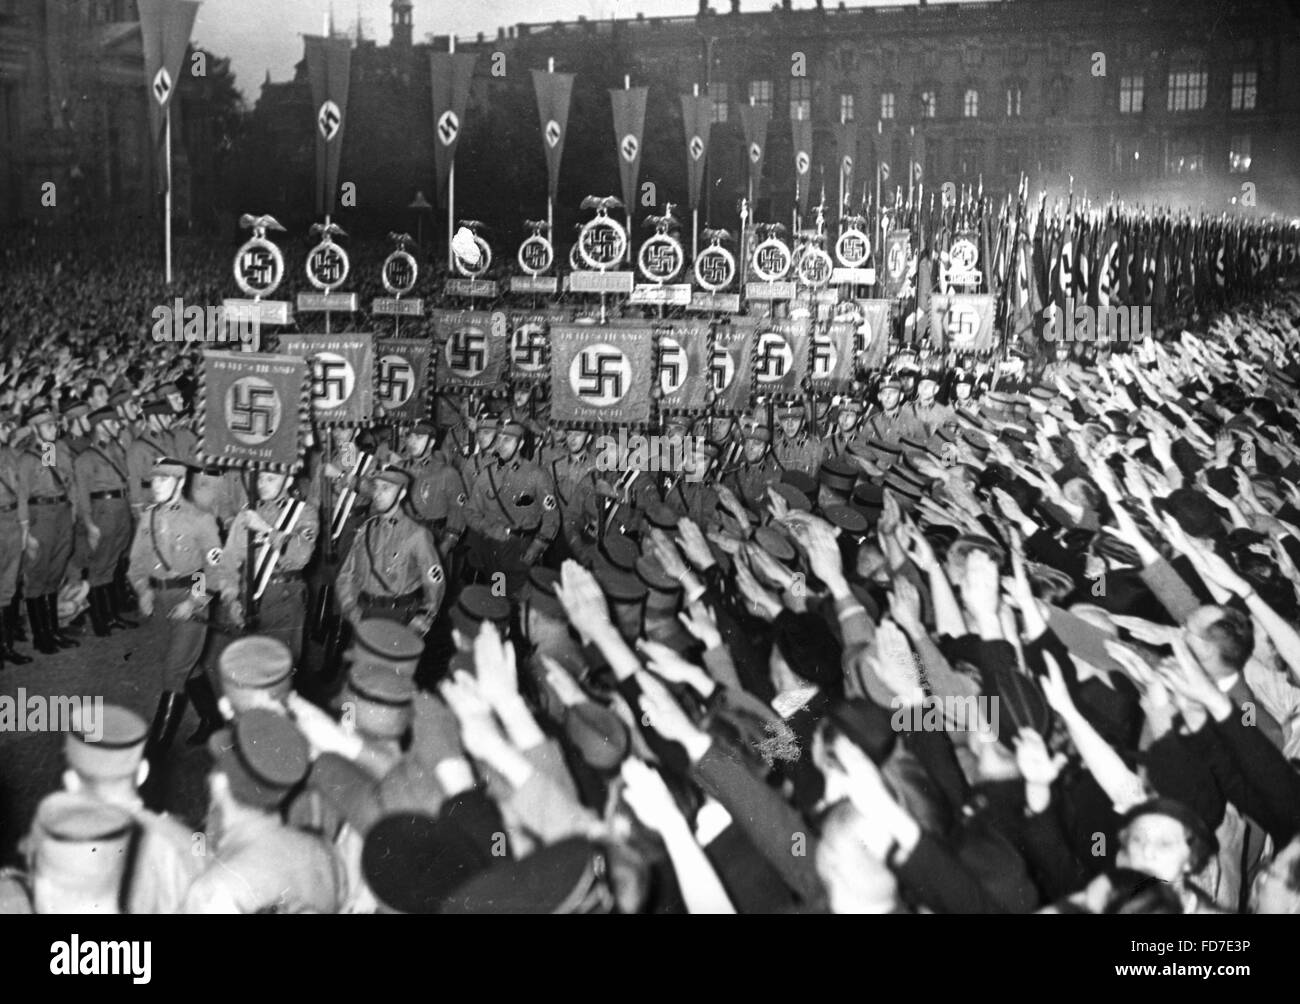 March of the SA in the Lustgarten in Berlin, 1938 Stock Photo